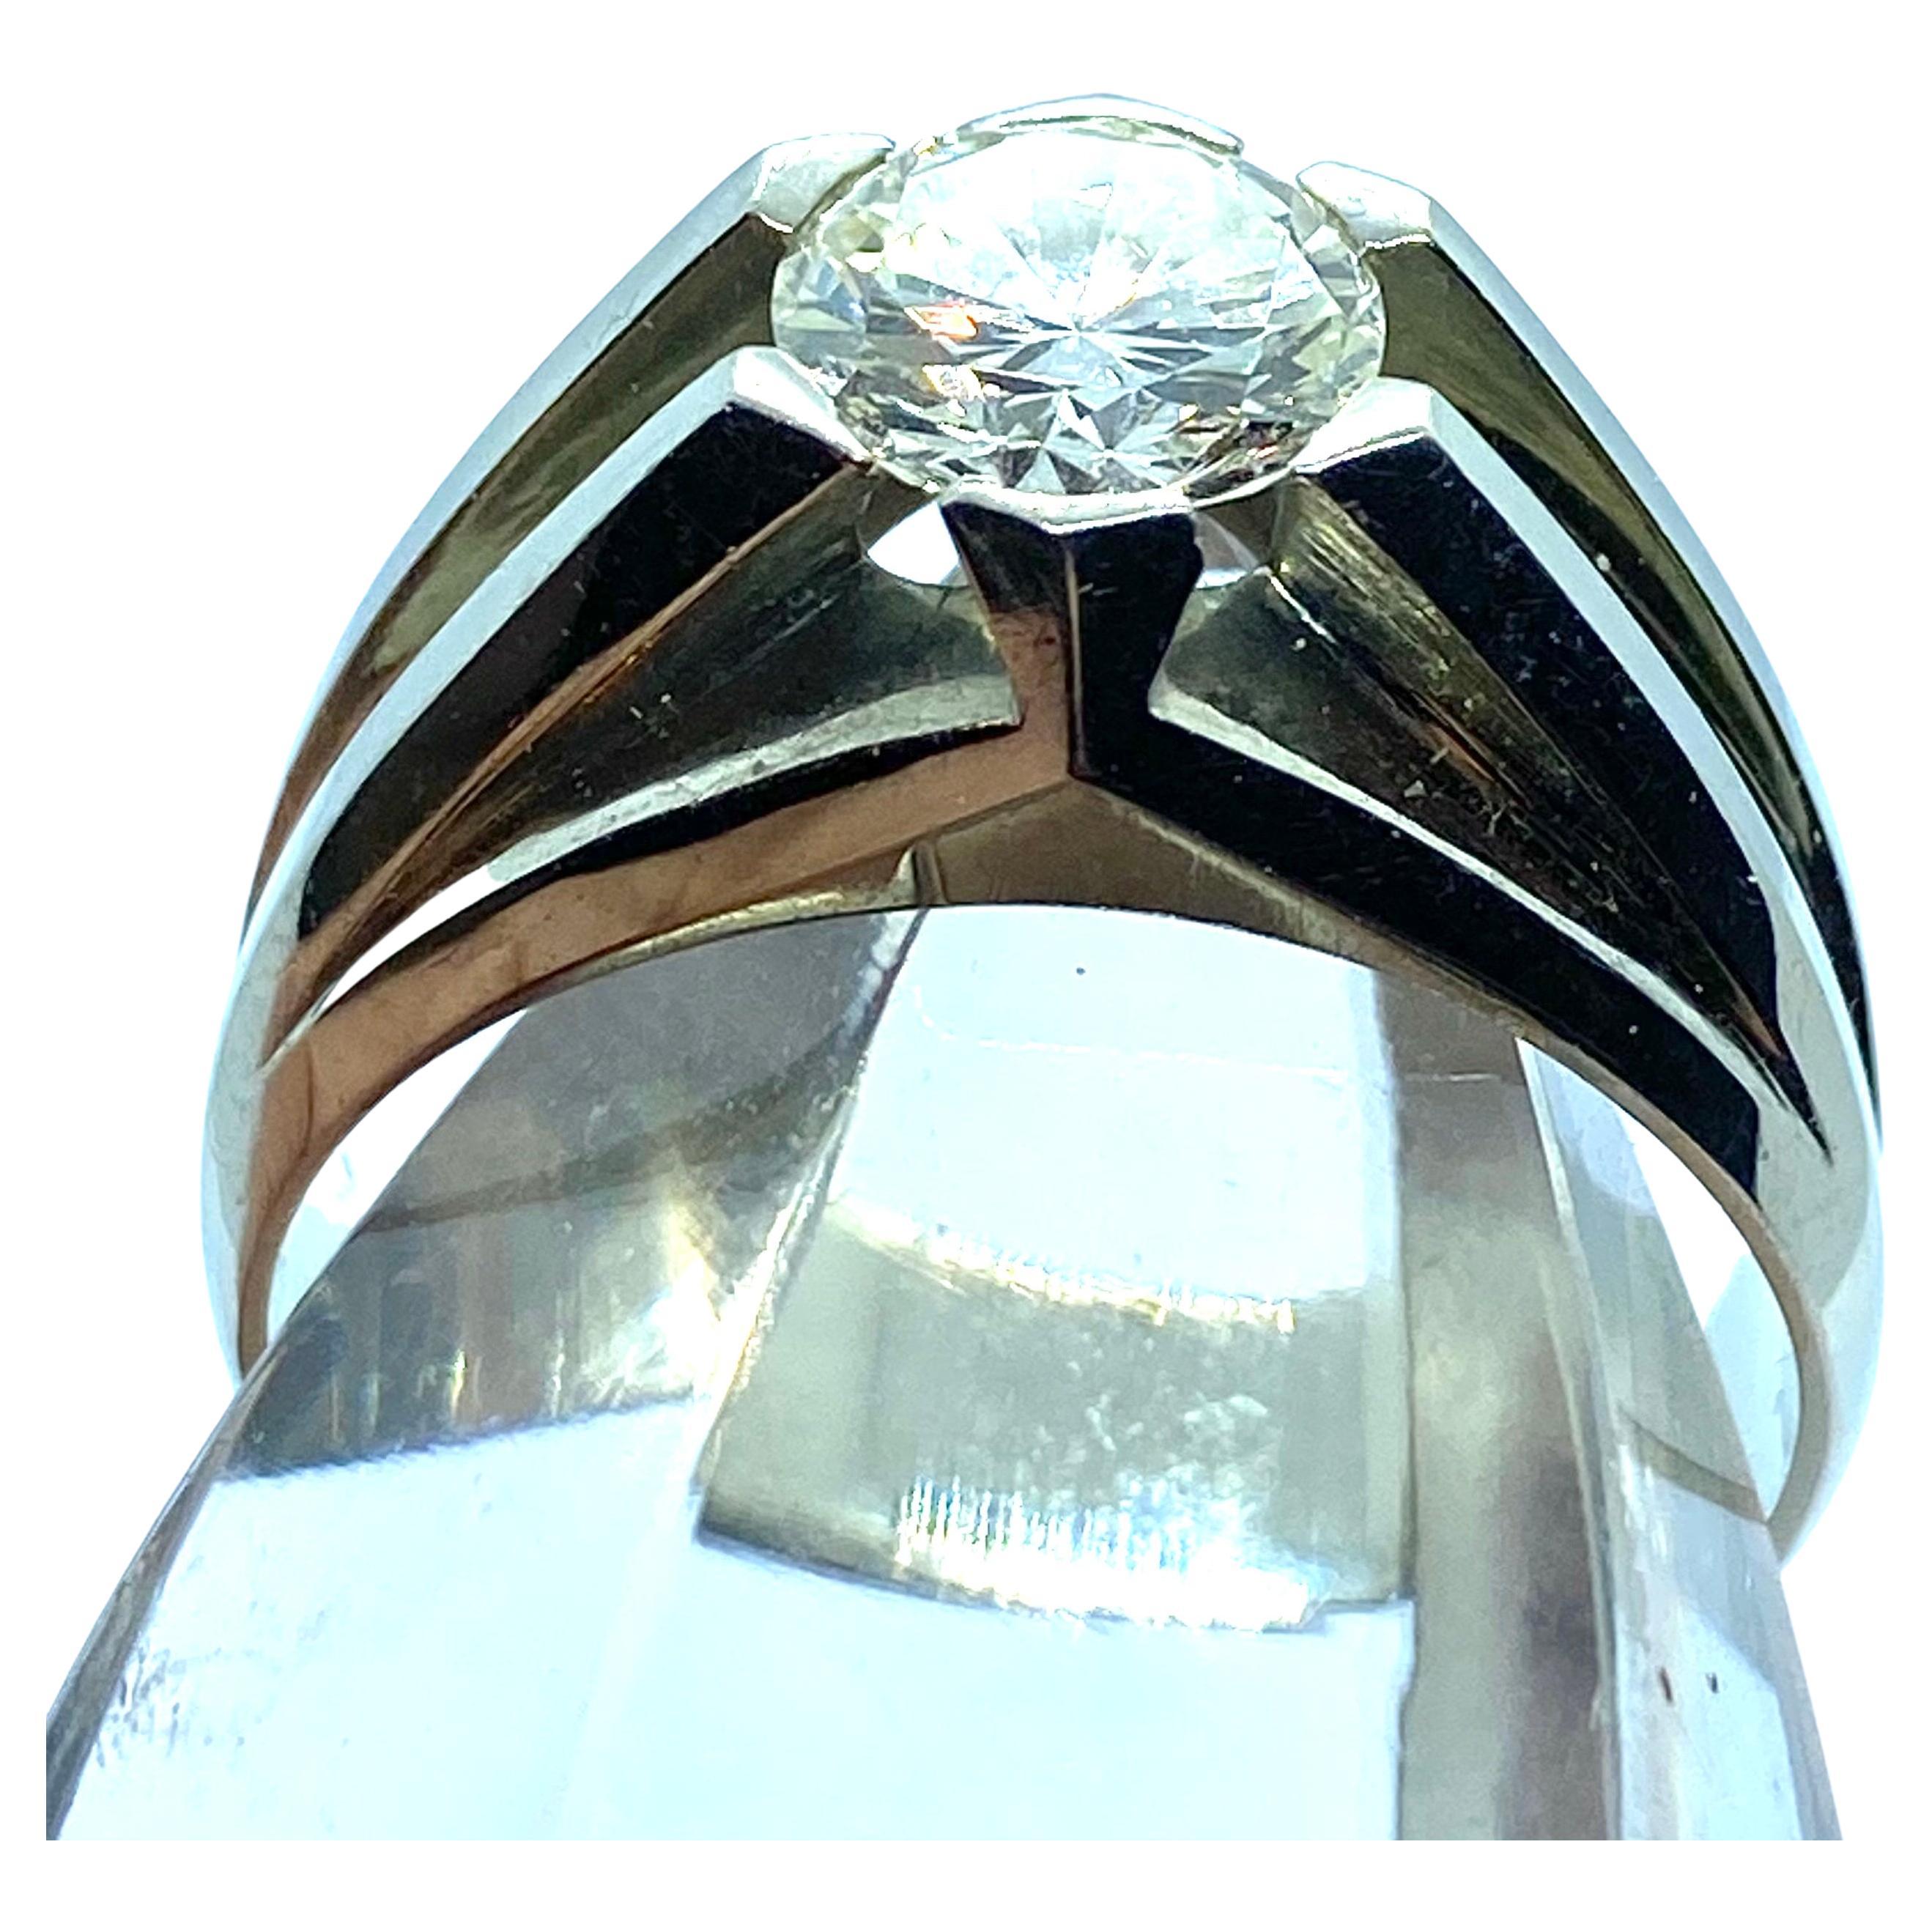 Solid 18K white gold man diamond ring
Diamond ct. 1,85, J color, VS1 clarity
Italian production, about 1930